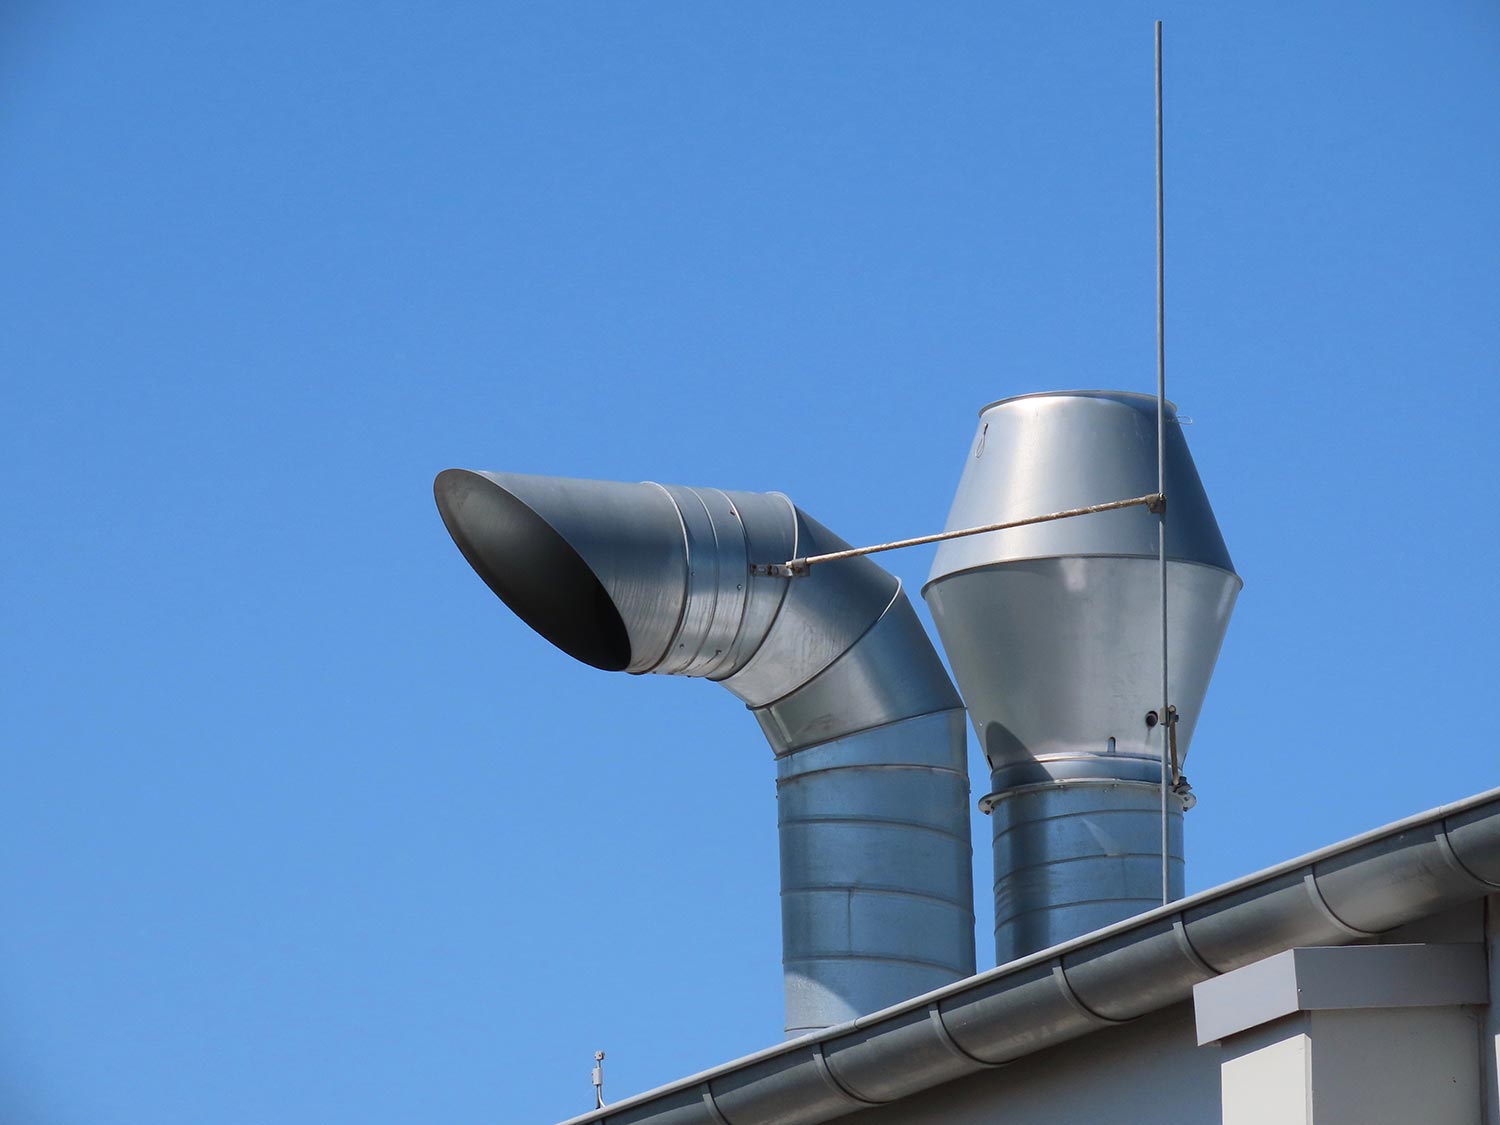 Exhaust chimneys of a ventilation system on top of a roof against bright blue sky